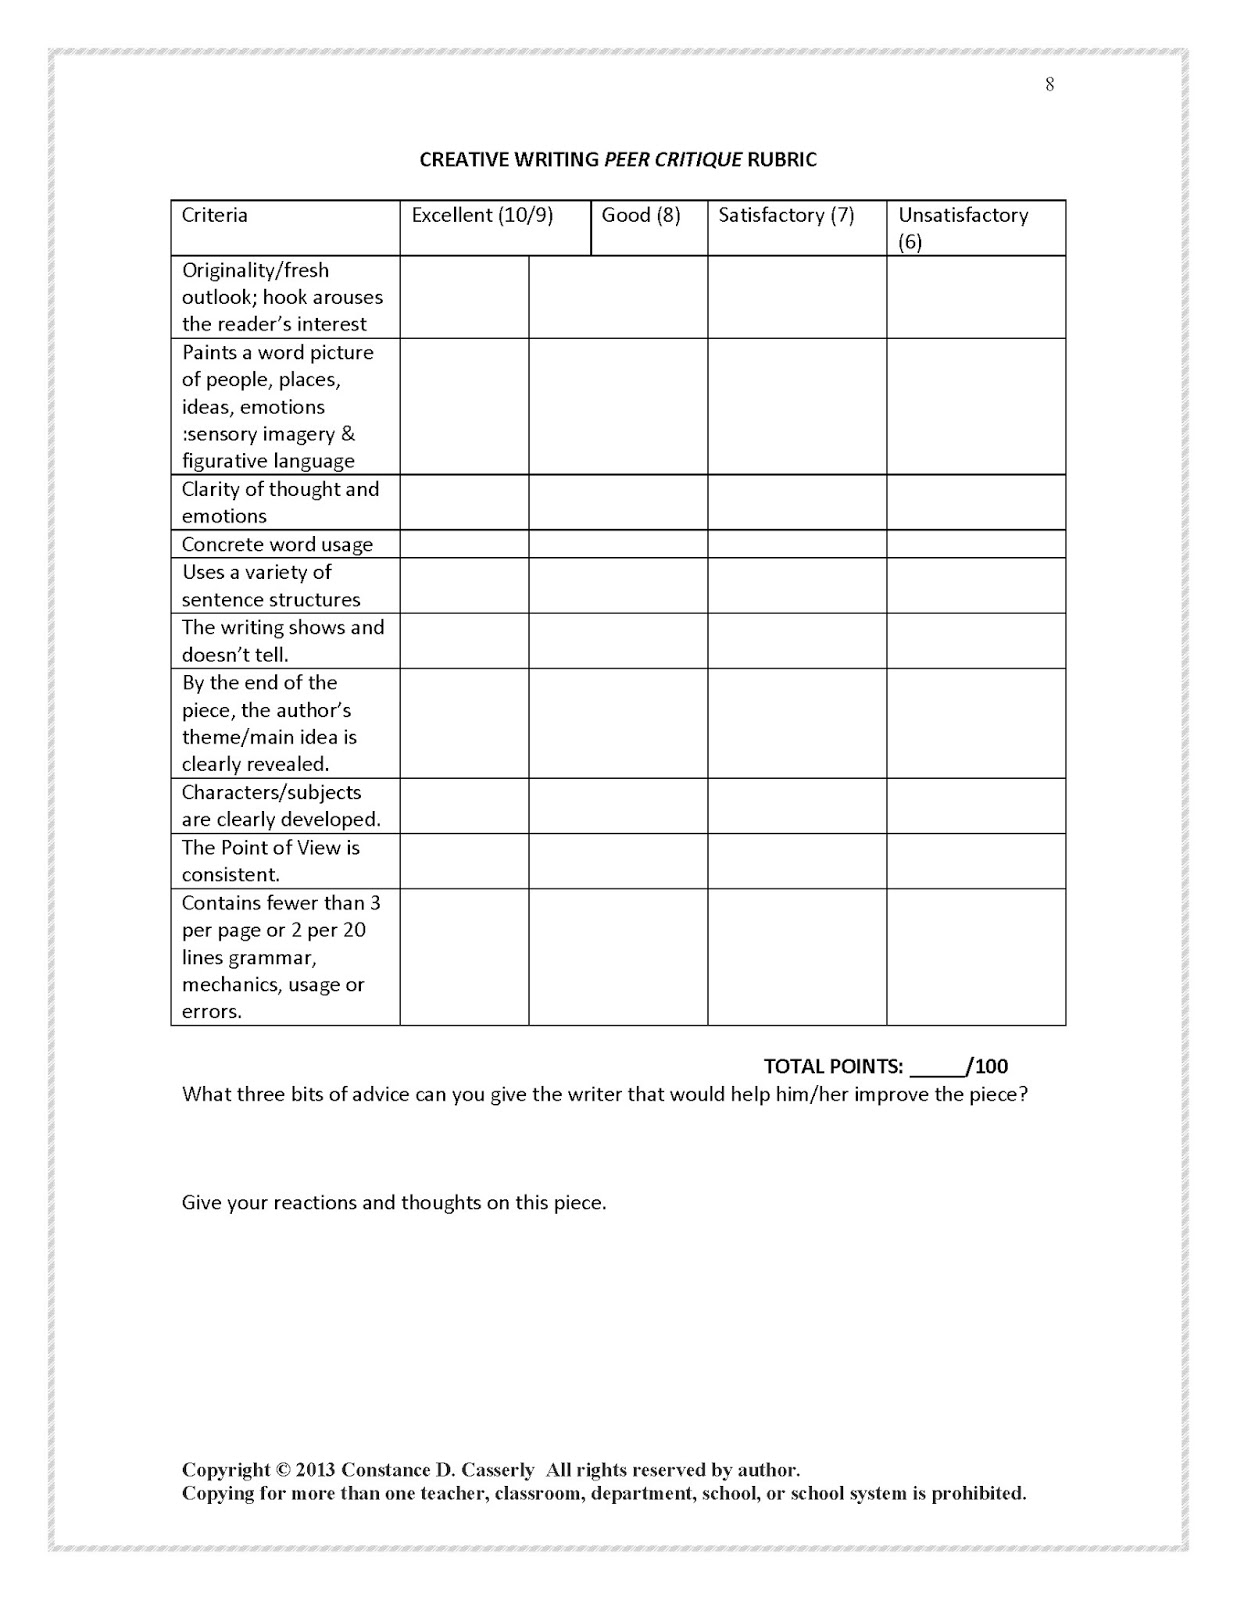 Rubric for essay write up